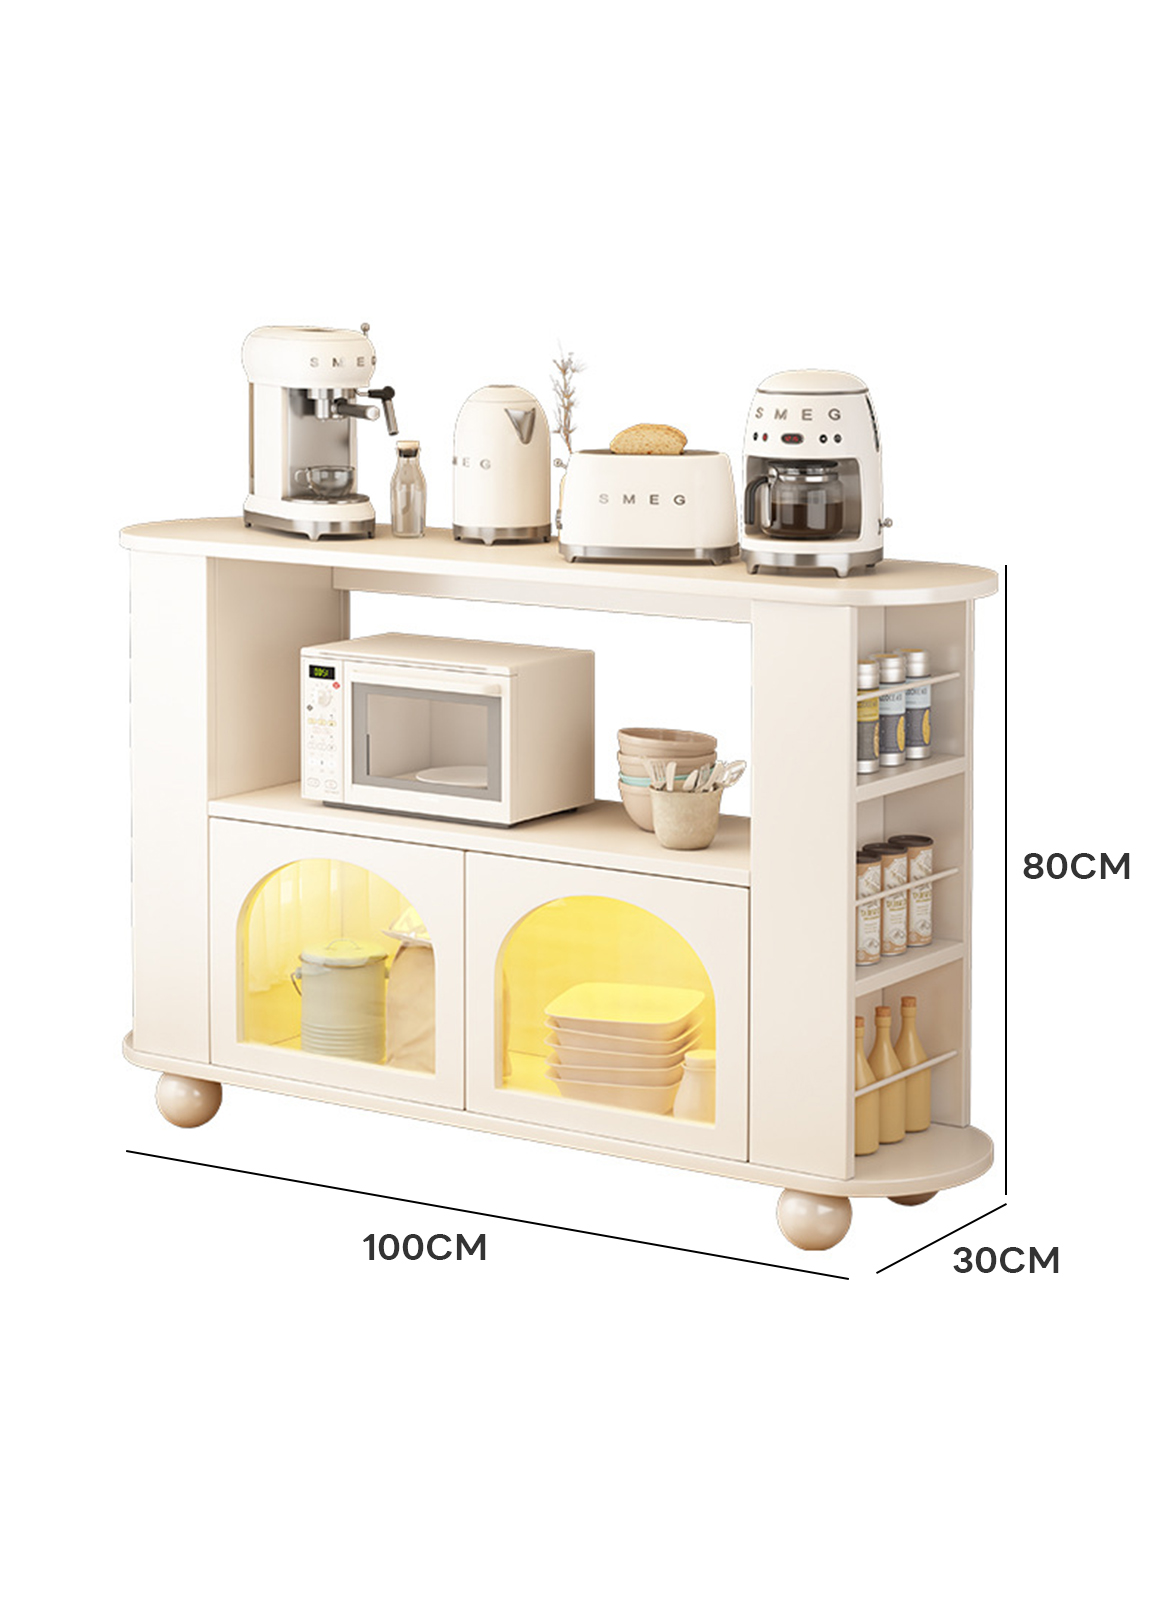 Ins Style Kitchen Cabinet, Cream-color Storage Sideboard for Kitchen &amp; Coffee Corner, Free-standing Sideboard with 2 Doors &amp; Opened Storage Space 100*30*80CM